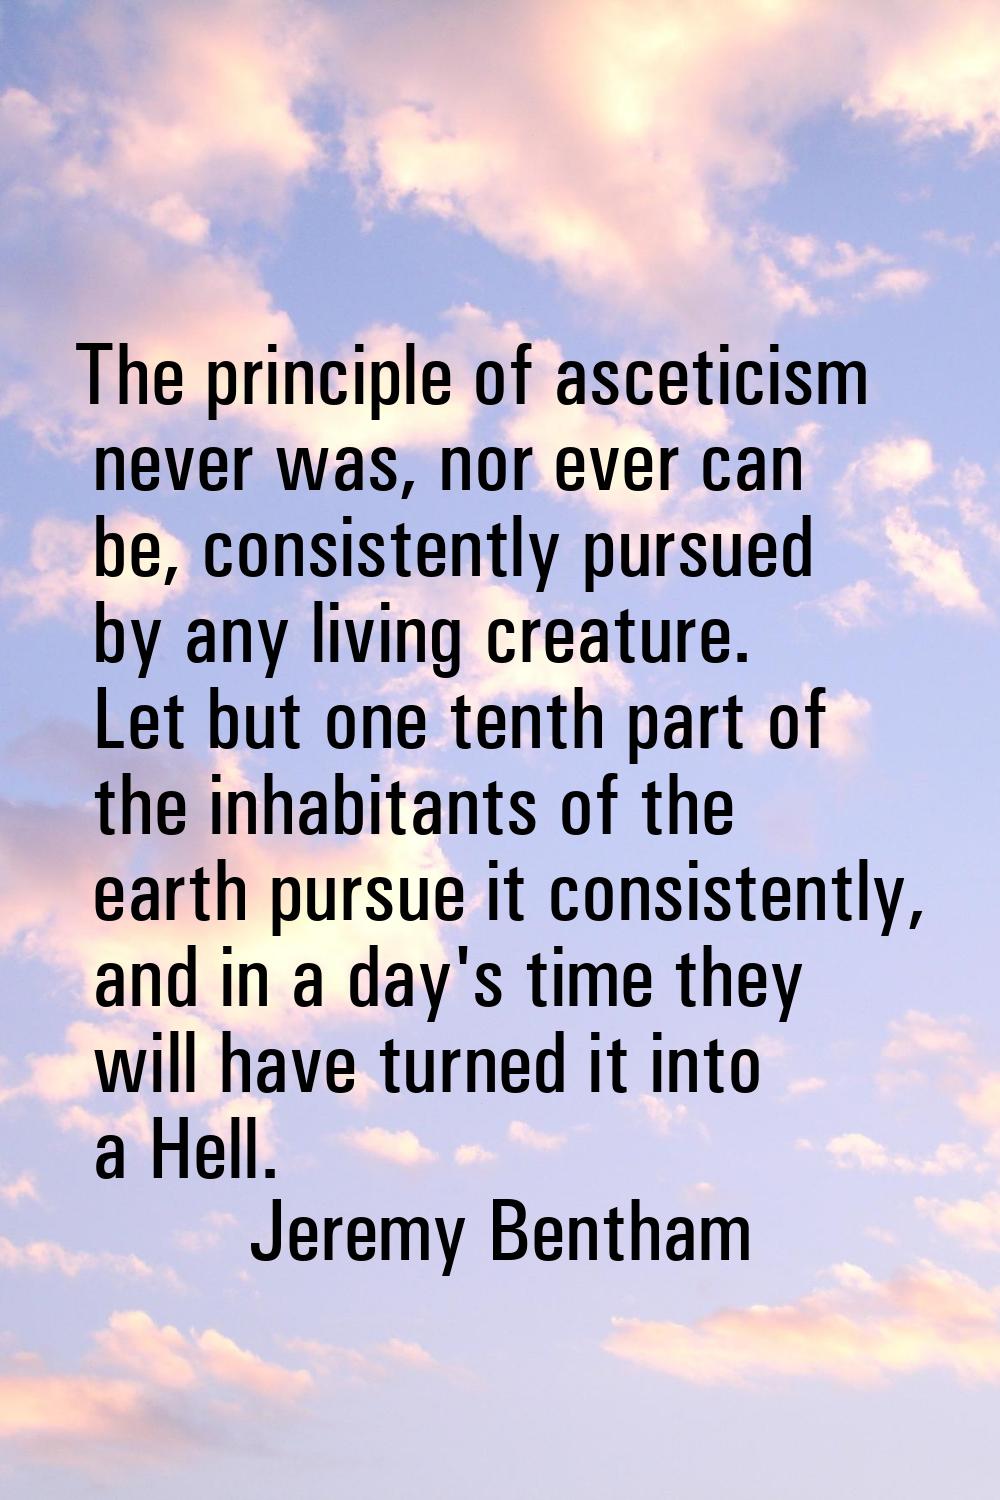 The principle of asceticism never was, nor ever can be, consistently pursued by any living creature